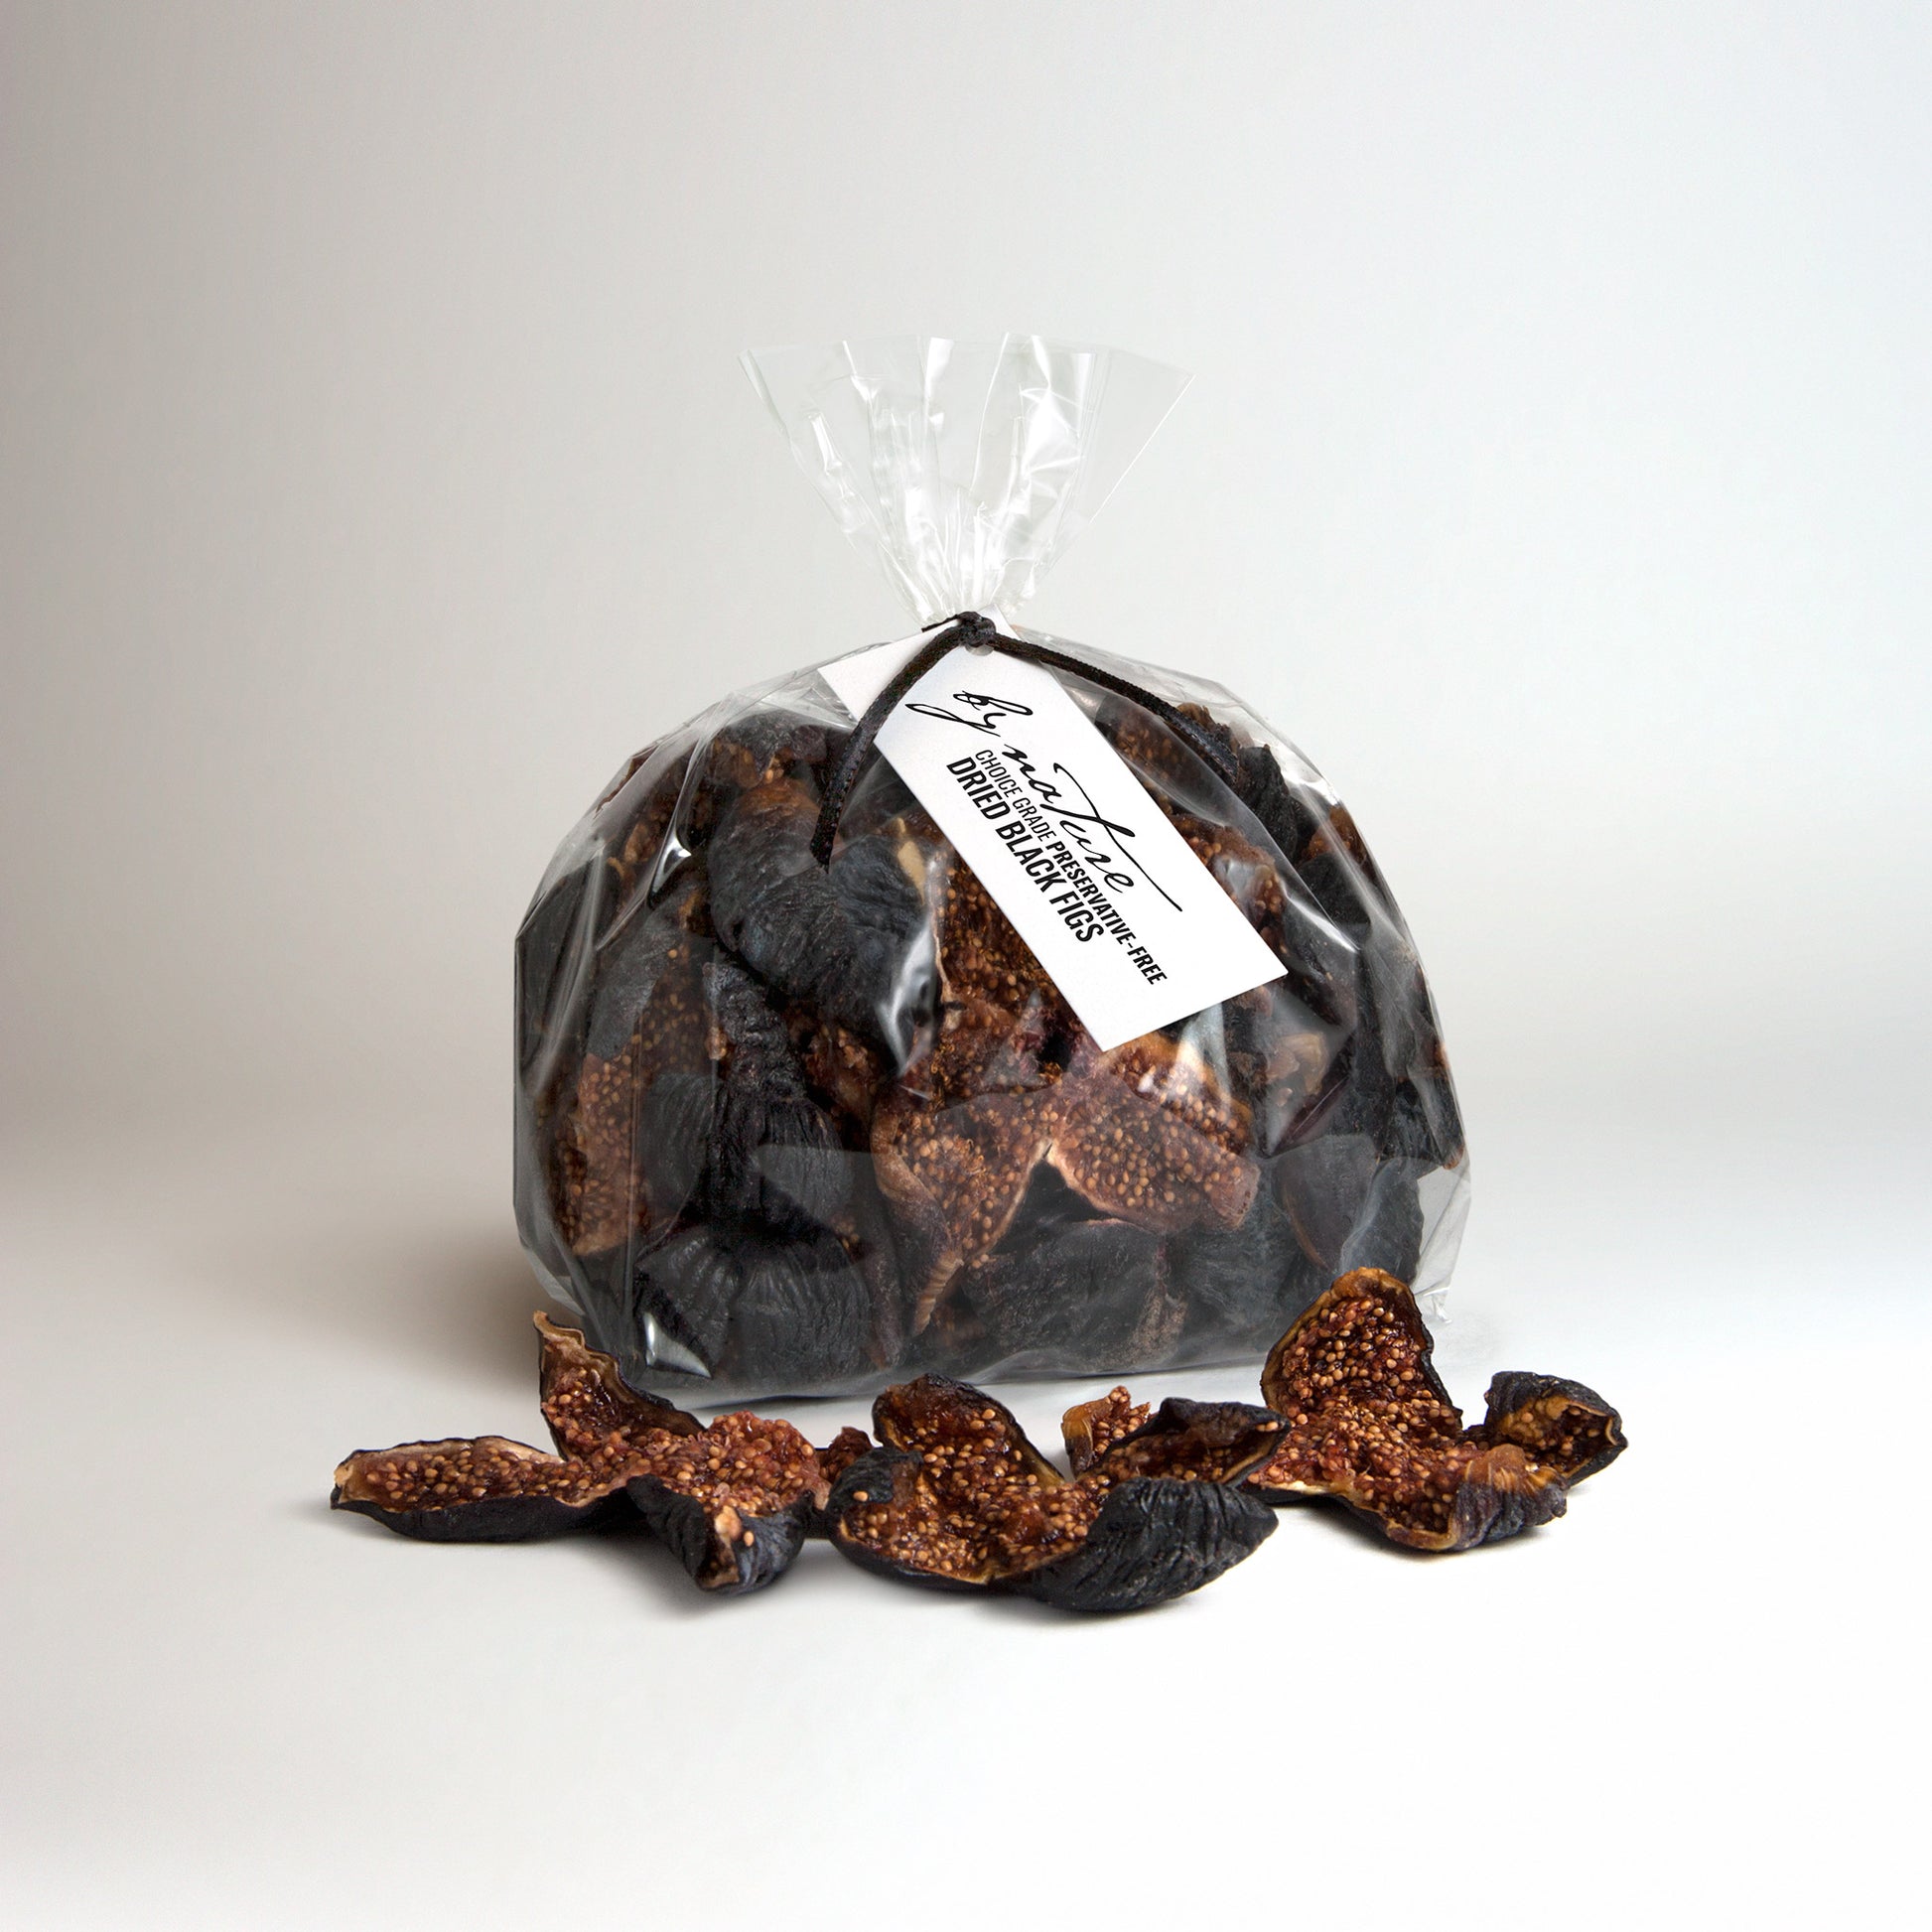 BY NATURE Dried Black Figs with skin, 500g - preservative-free.